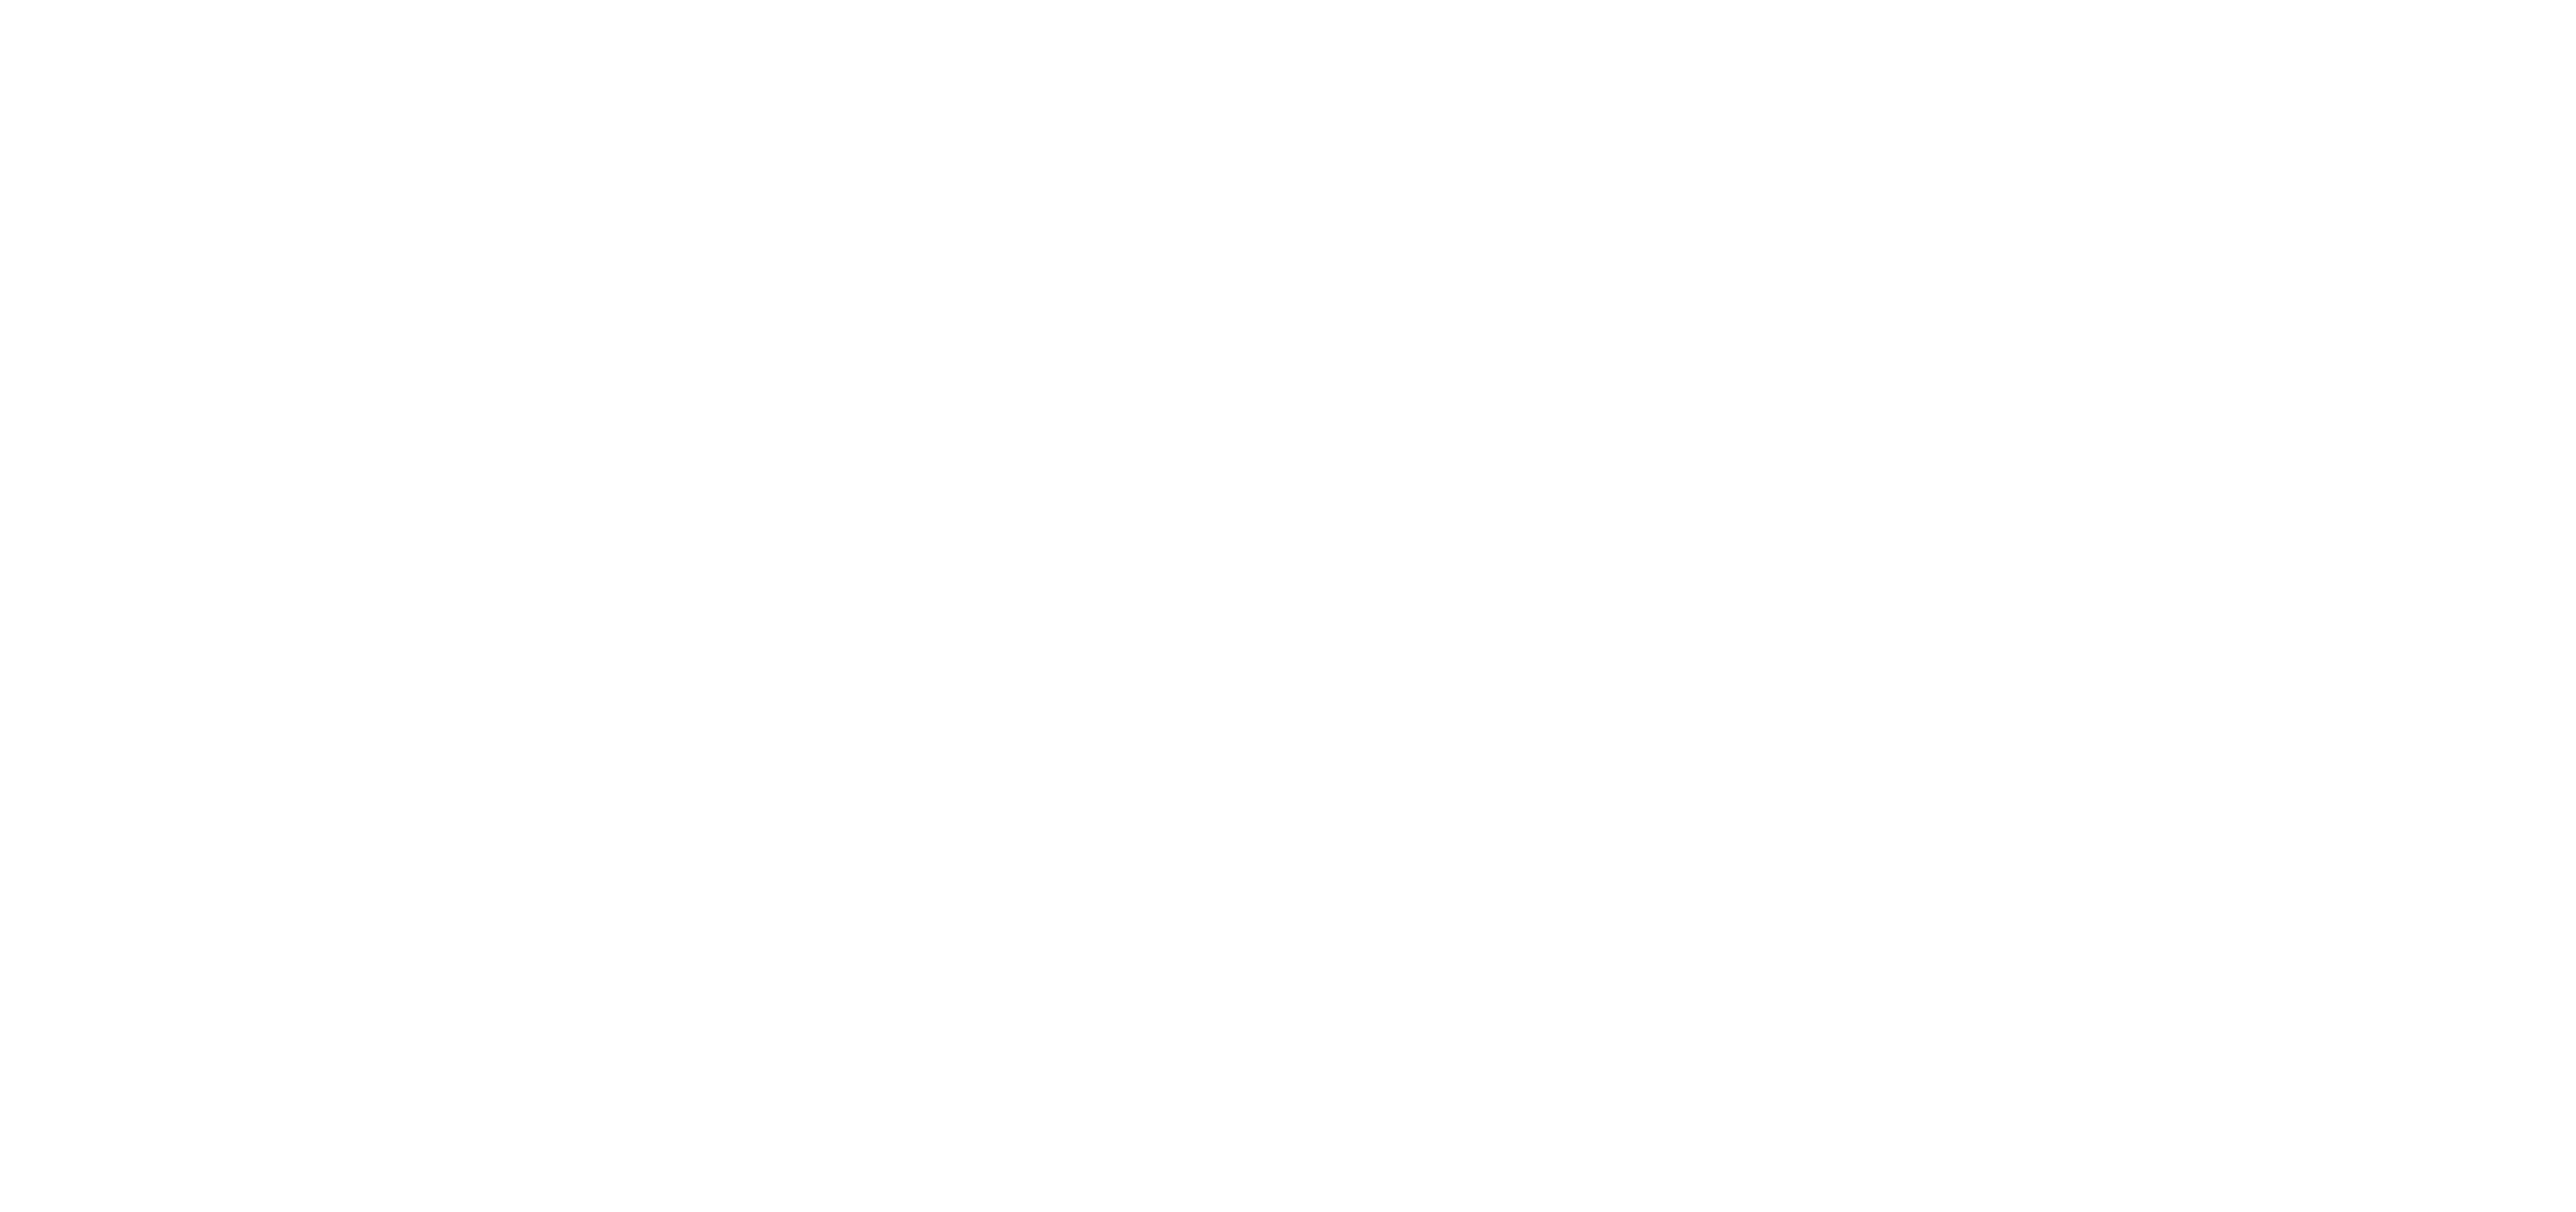 a white logo for palace puerto rosario on a black background